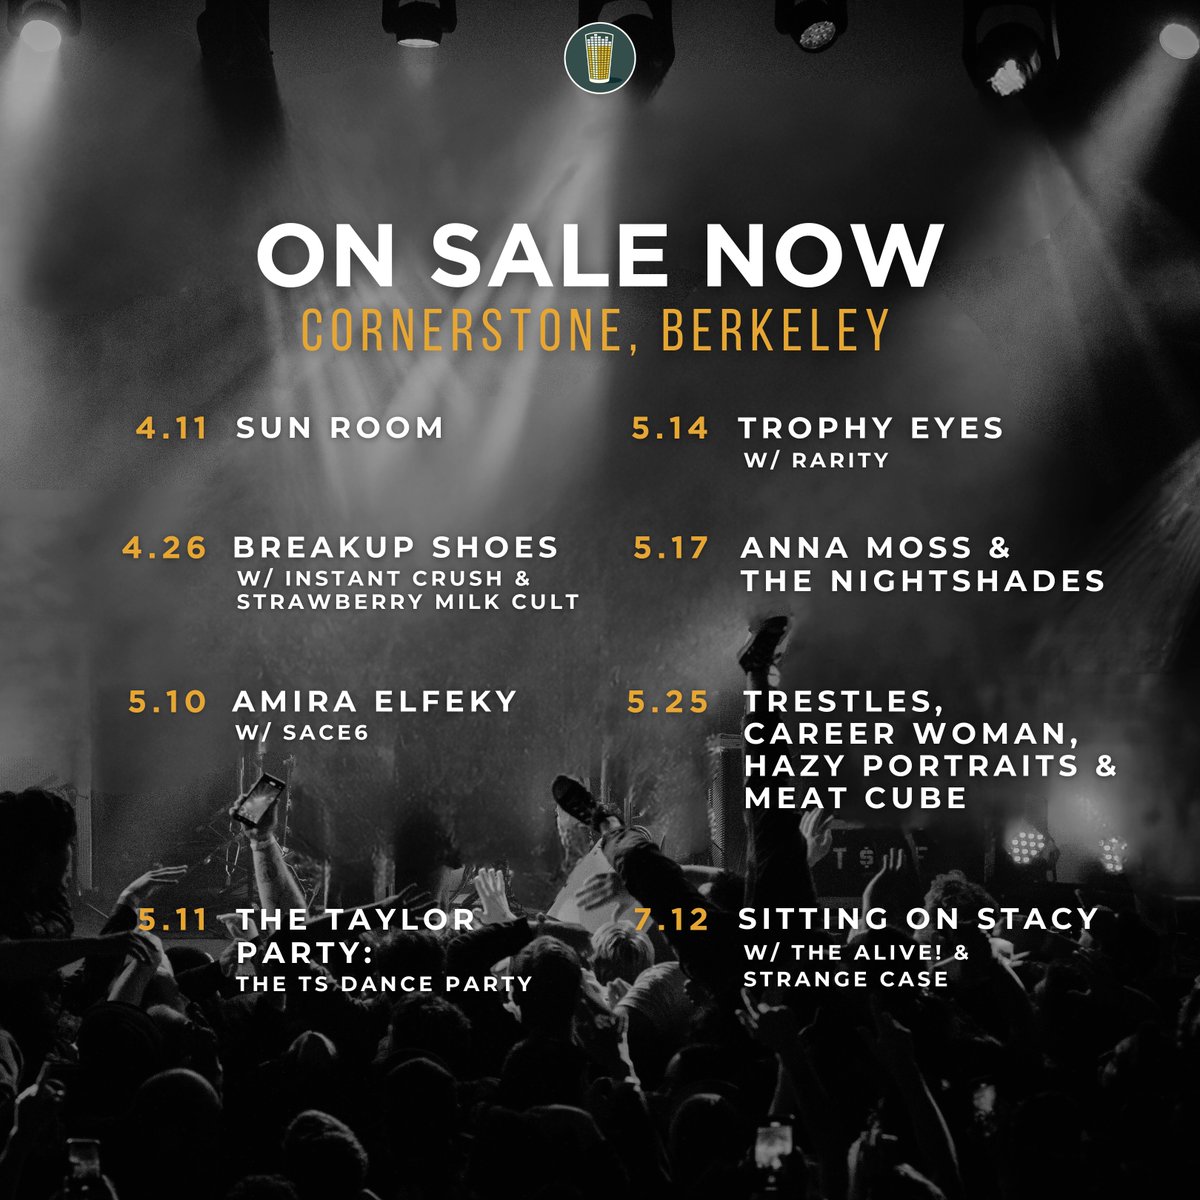 ⚡️ON SALE NOW!⚡️ 4.11 | SUN ROOM 4.26 | Breakup Shoes 5.10 | Amira Elfeky 5.11 | The Taylor Party 5.14 | Trophy Eyes 5.17 | Anna Moss 5.25 | Trestles 7.12 | Sitting On Stacy 🎟 cornerstoneberkeley.com/events